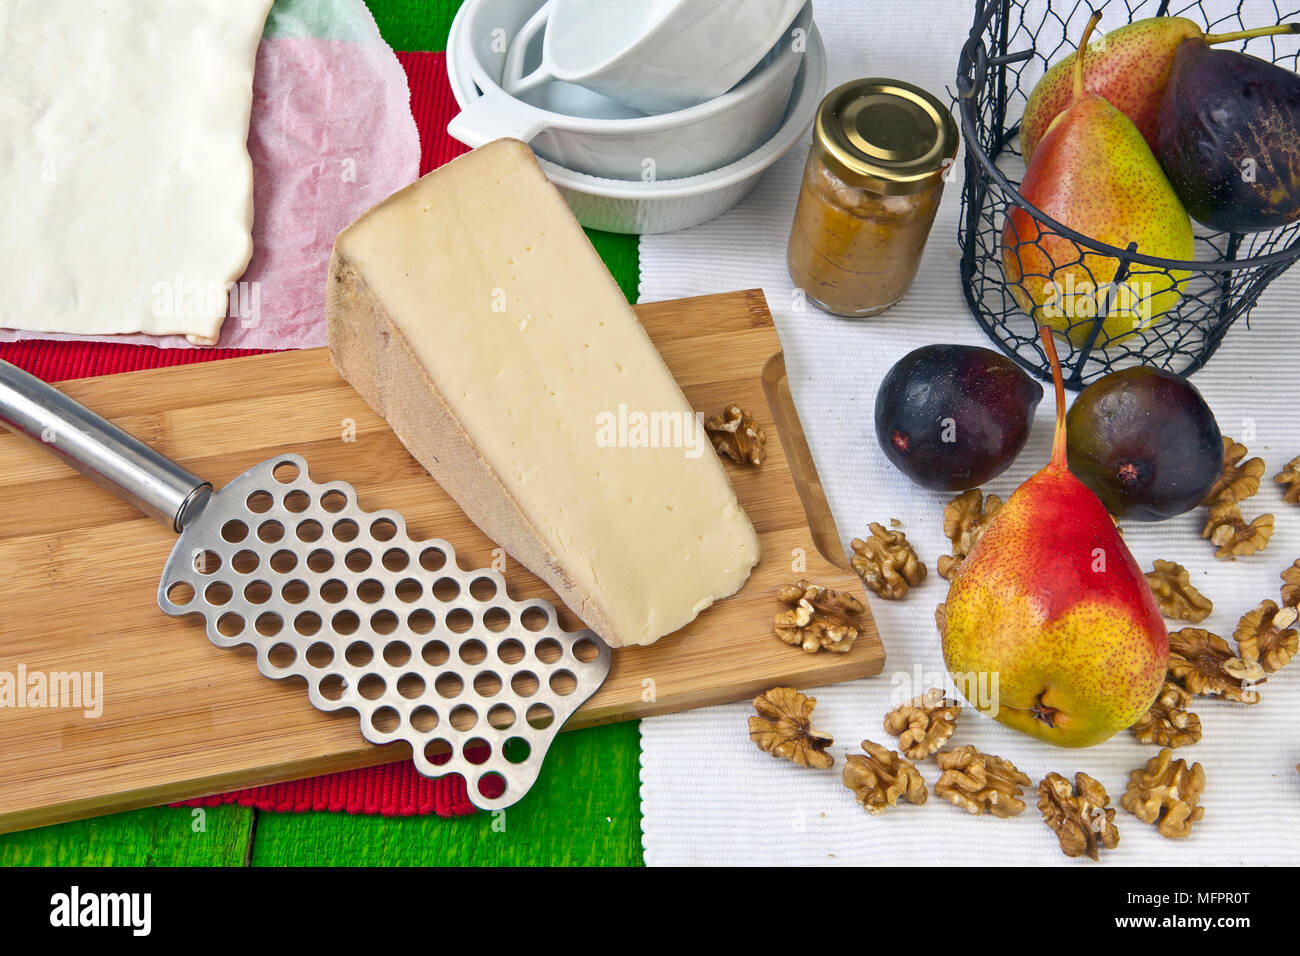 Pears, figs, Vacherin and puff - the ingredients for a Swiss Tart Stock Photo